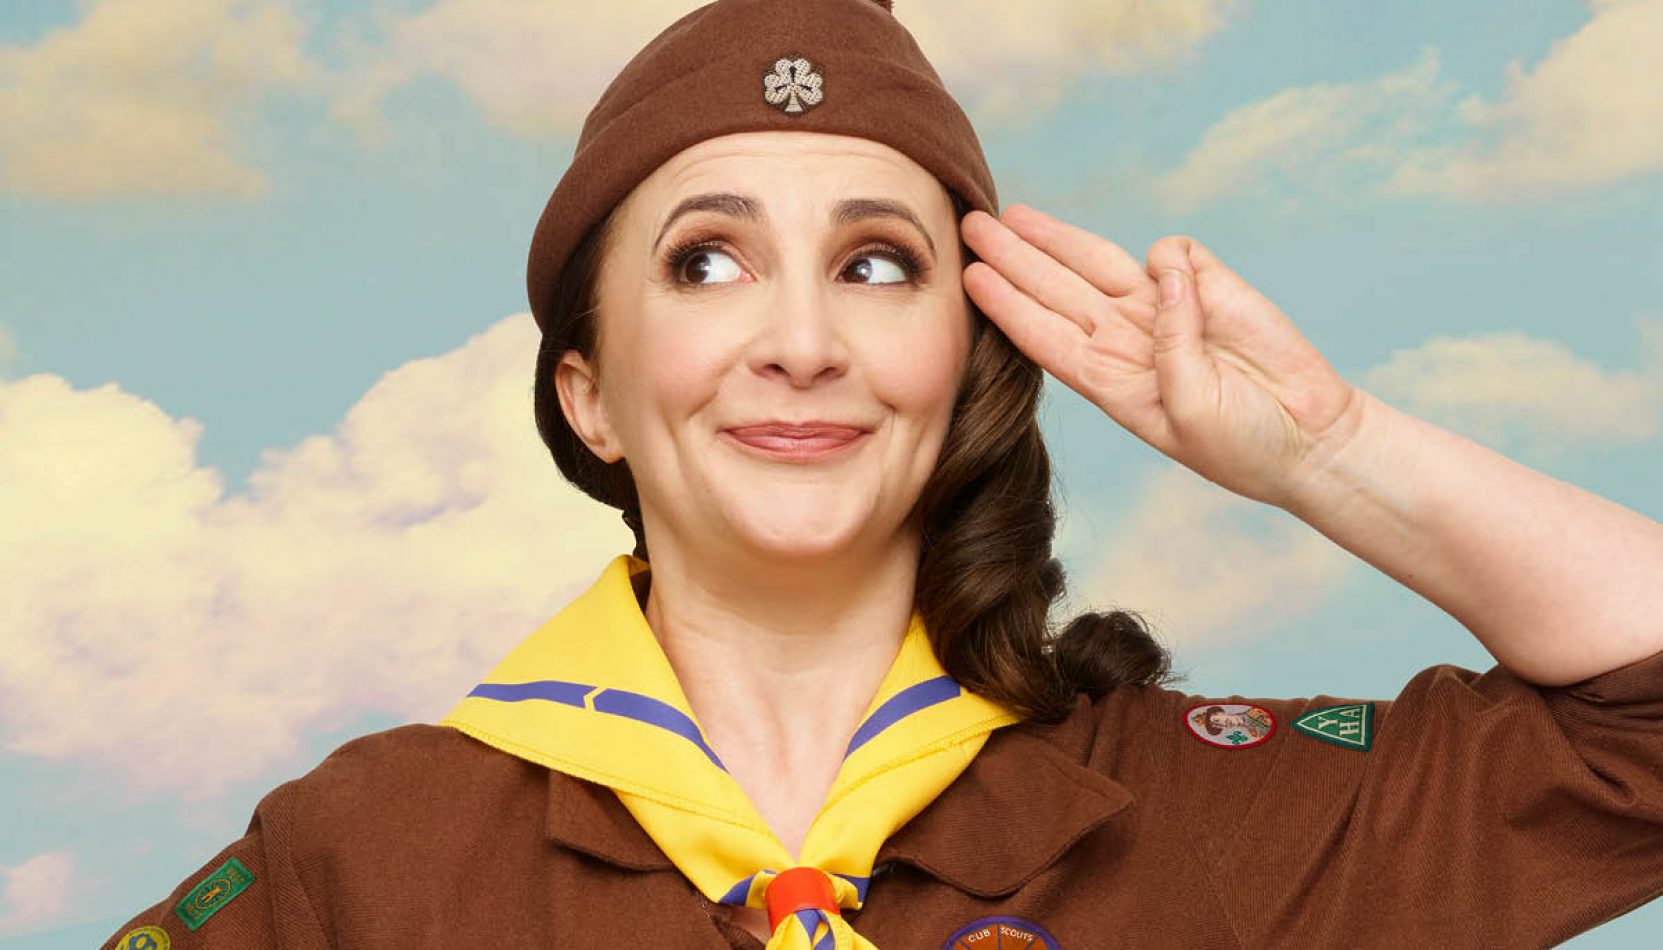 lucy porter, g live, march 2020, comedy, stand-up comedy, be prepared, interview, talking to lucy porter, entertainment, bellerby studio, guide to whats on, guide to surrey, guide to comedy, interview, surrey, newspaper, guide